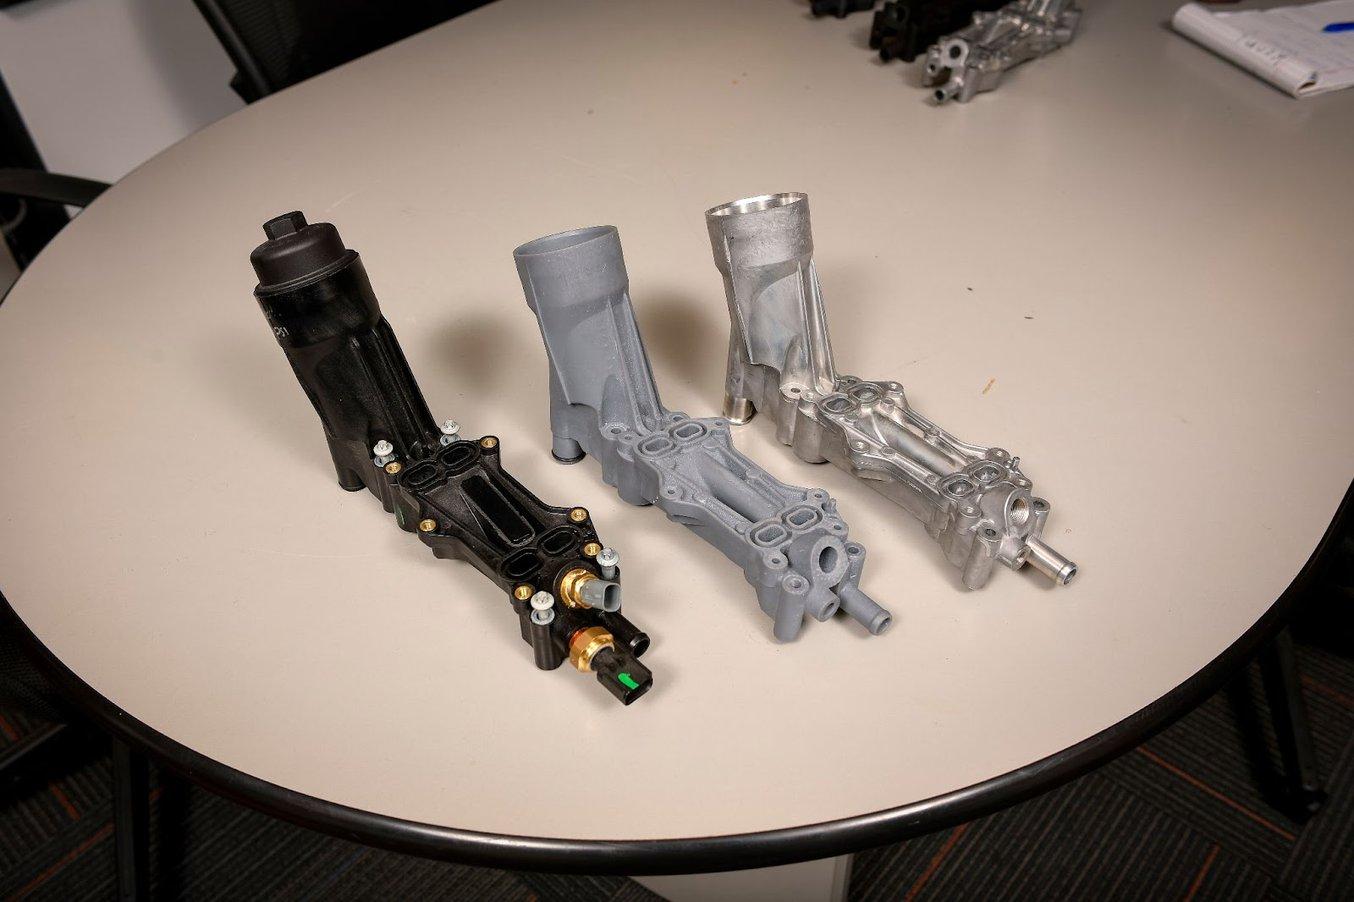 An engine component that was failing for many car owners was remanufactured, and seen here prototyped.